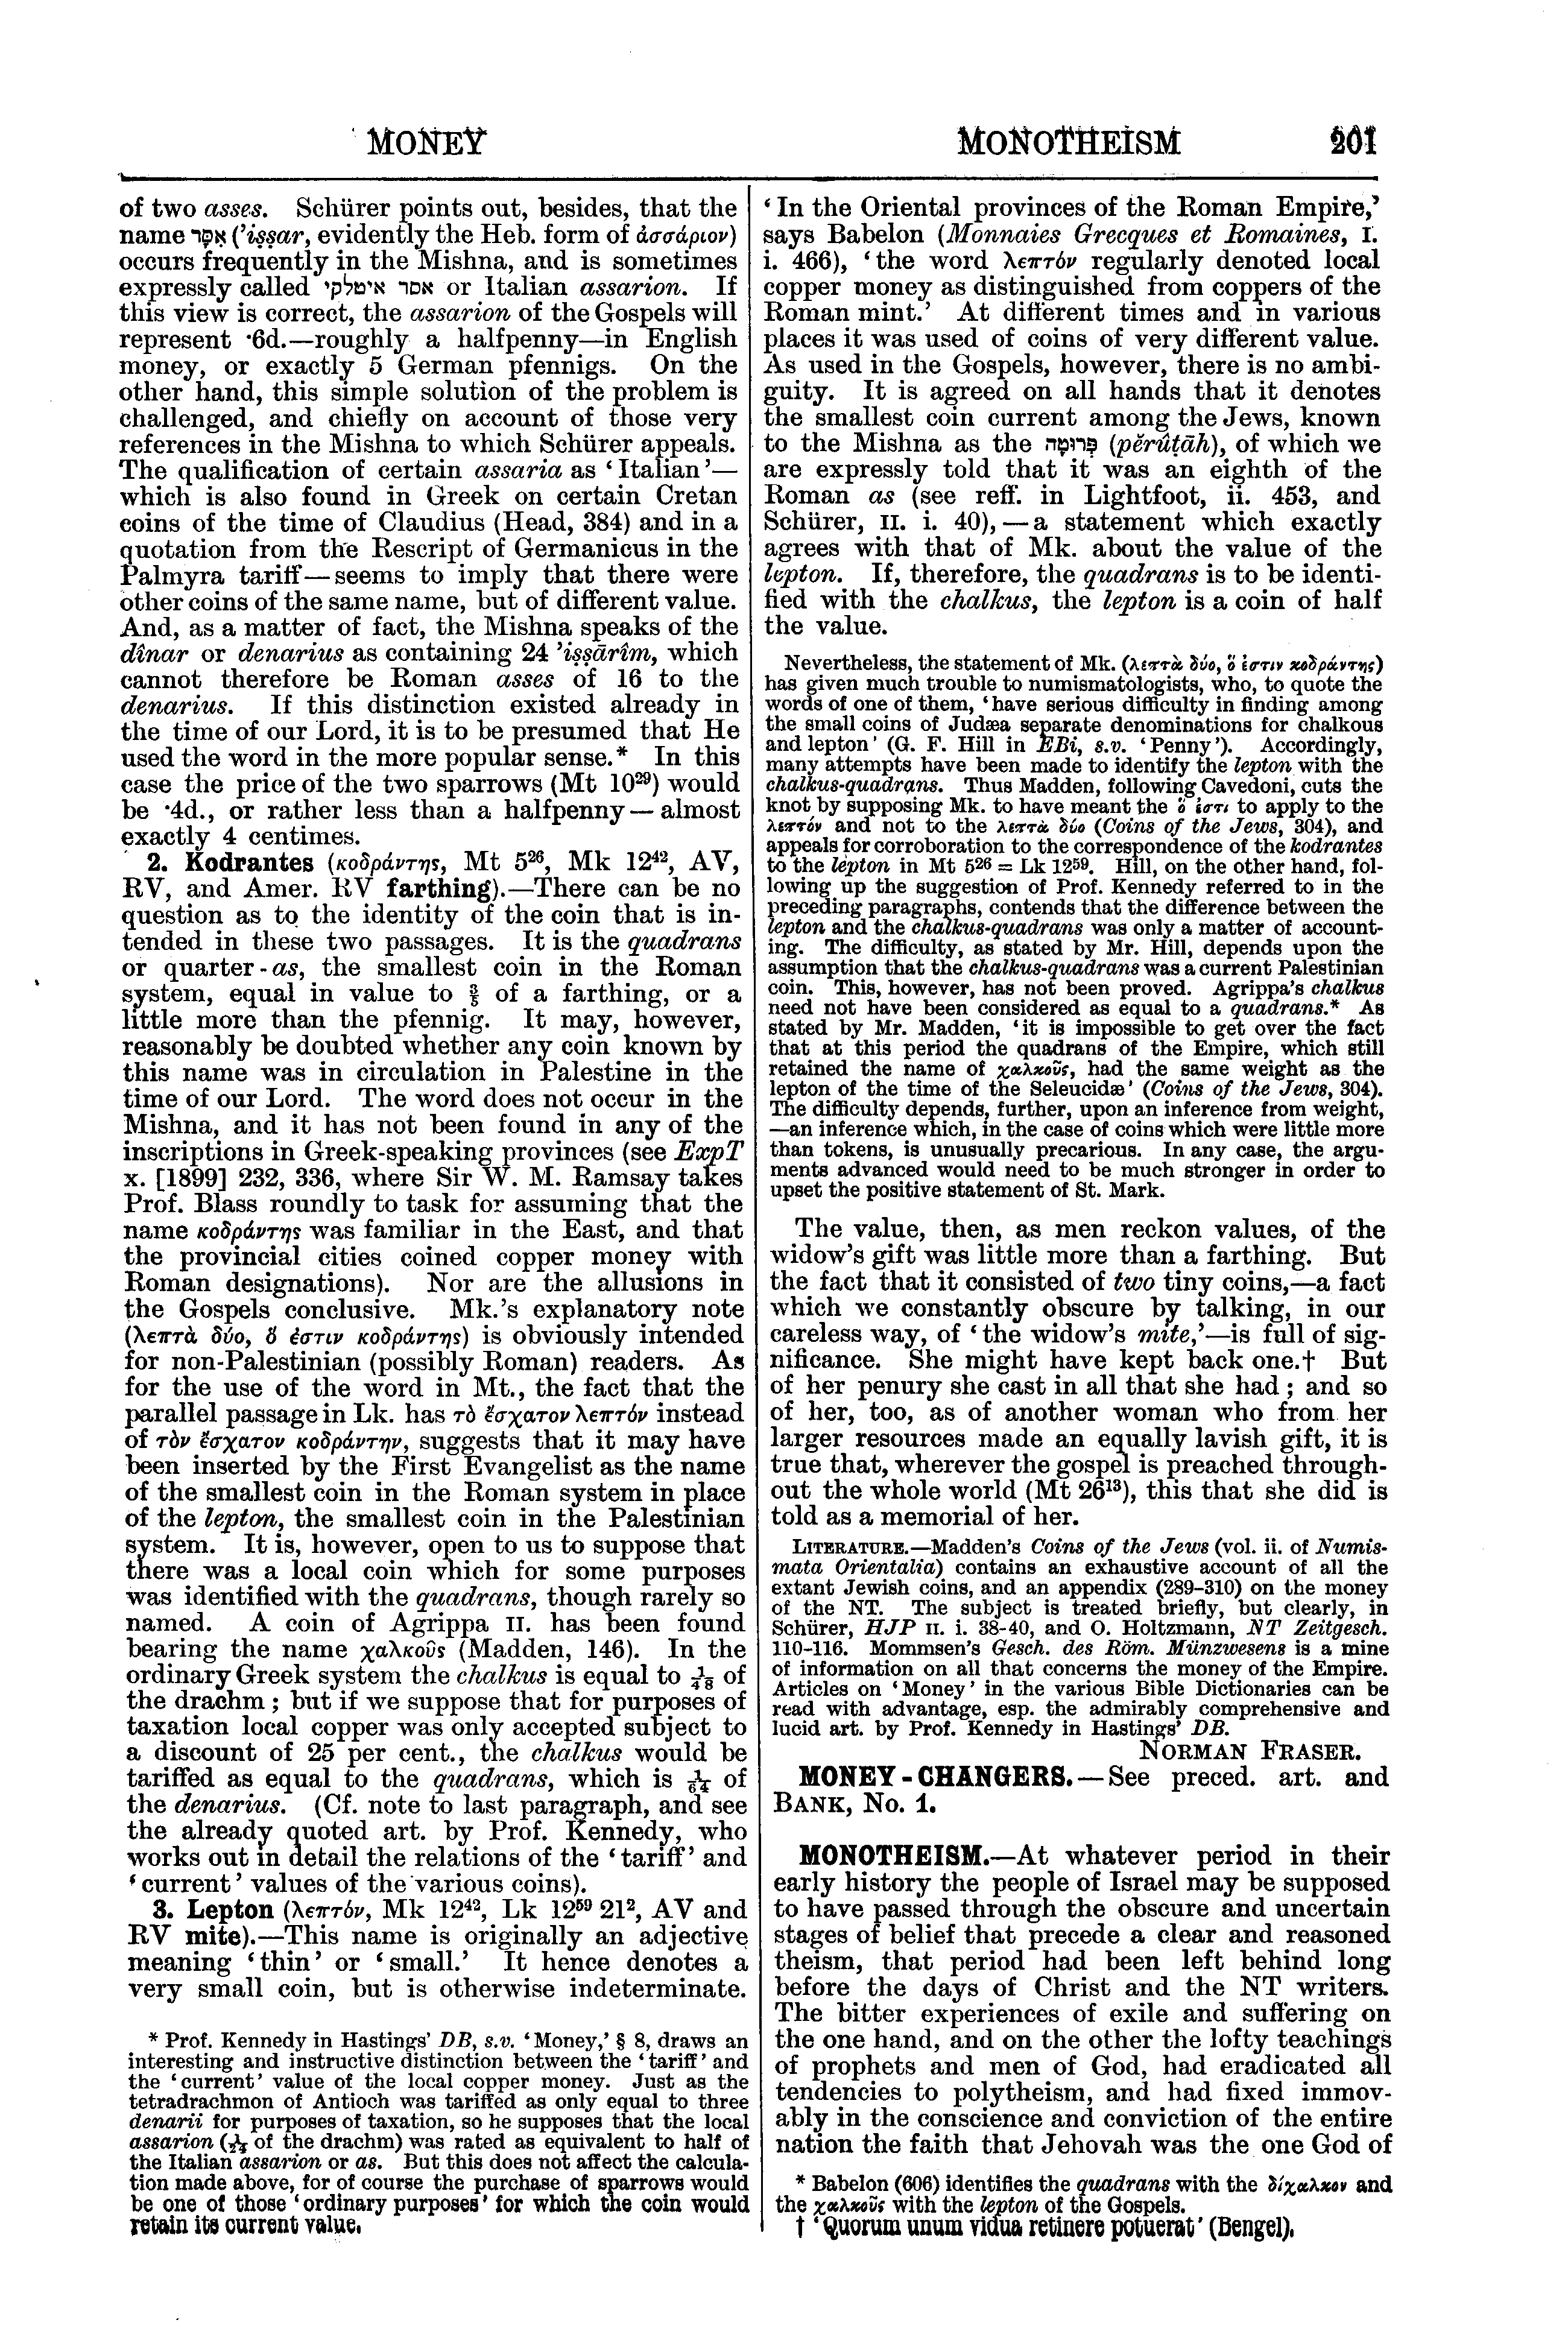 Image of page 201